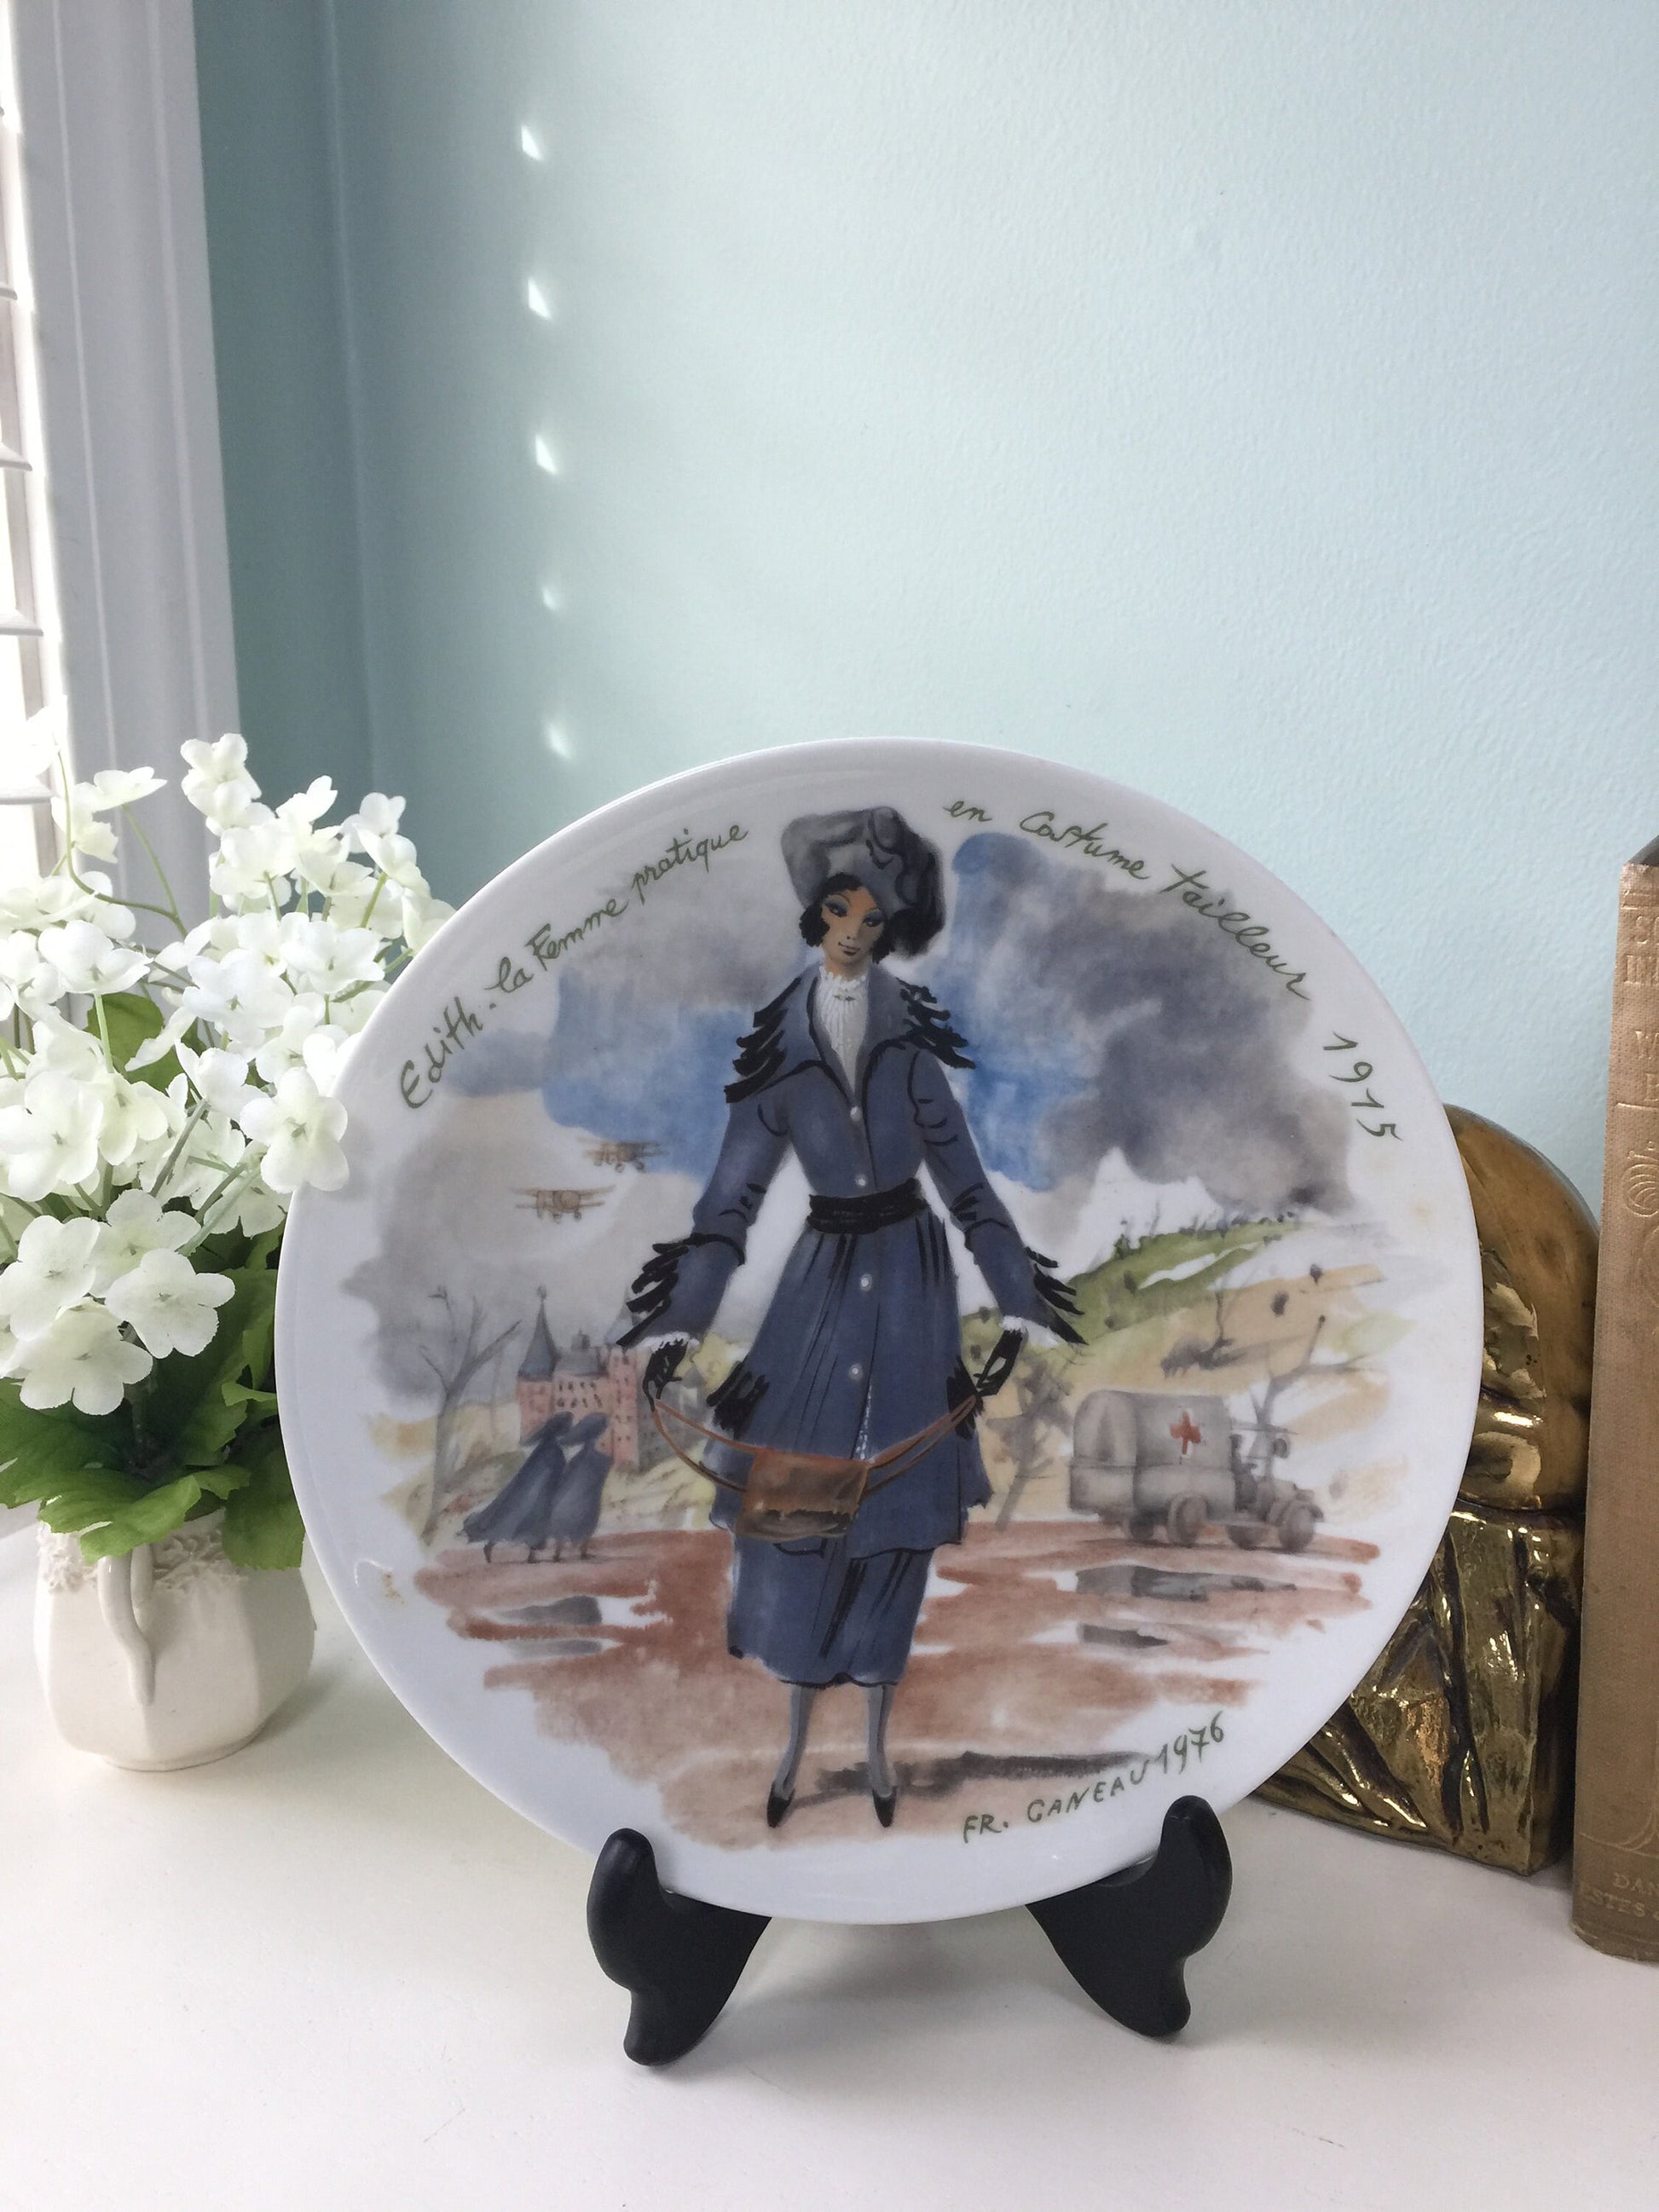 Vintage Limoges French Plate, 1976 Collectible Plate, Women of the Century, FR Ganeau, Edith la Femme Matique - Duckwells